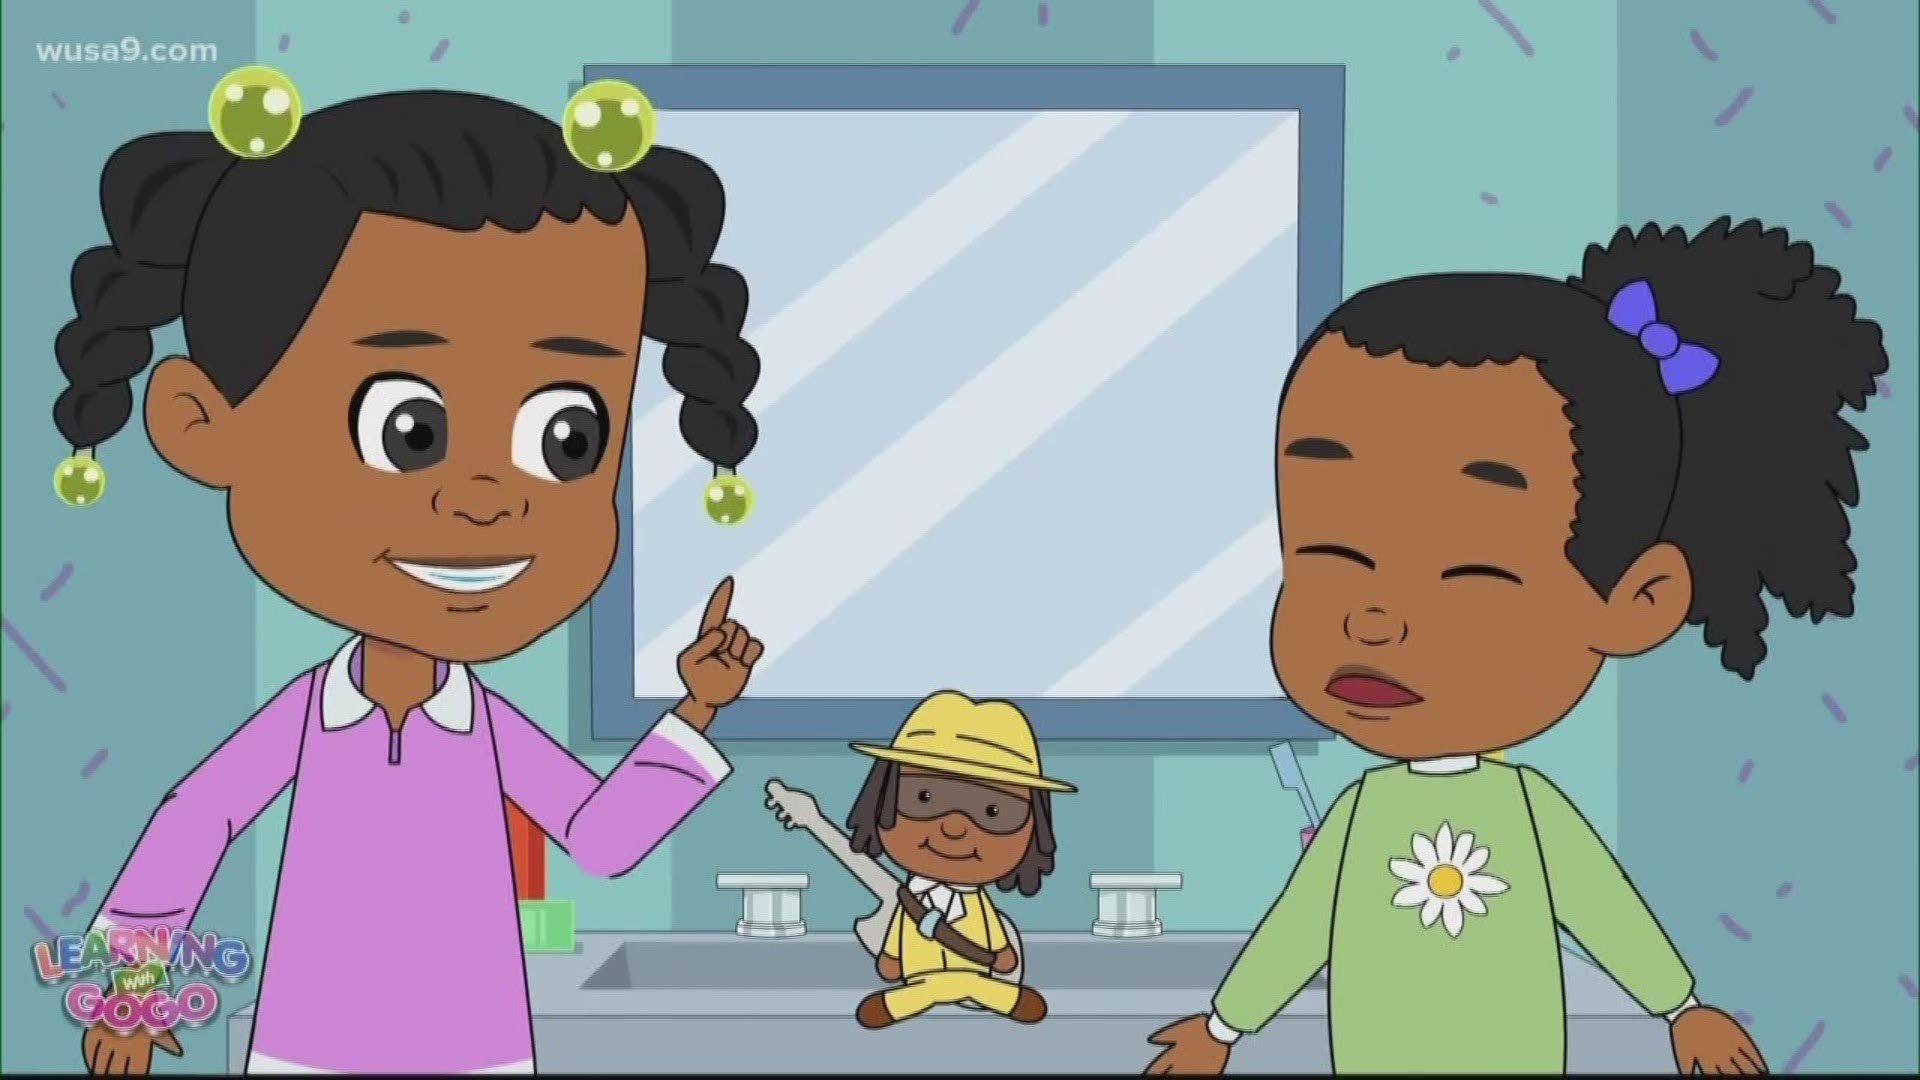 A DC Native created a cartoon based around the official music of the District; Go-Go music. It's catchy, fun and might get stuck in your head